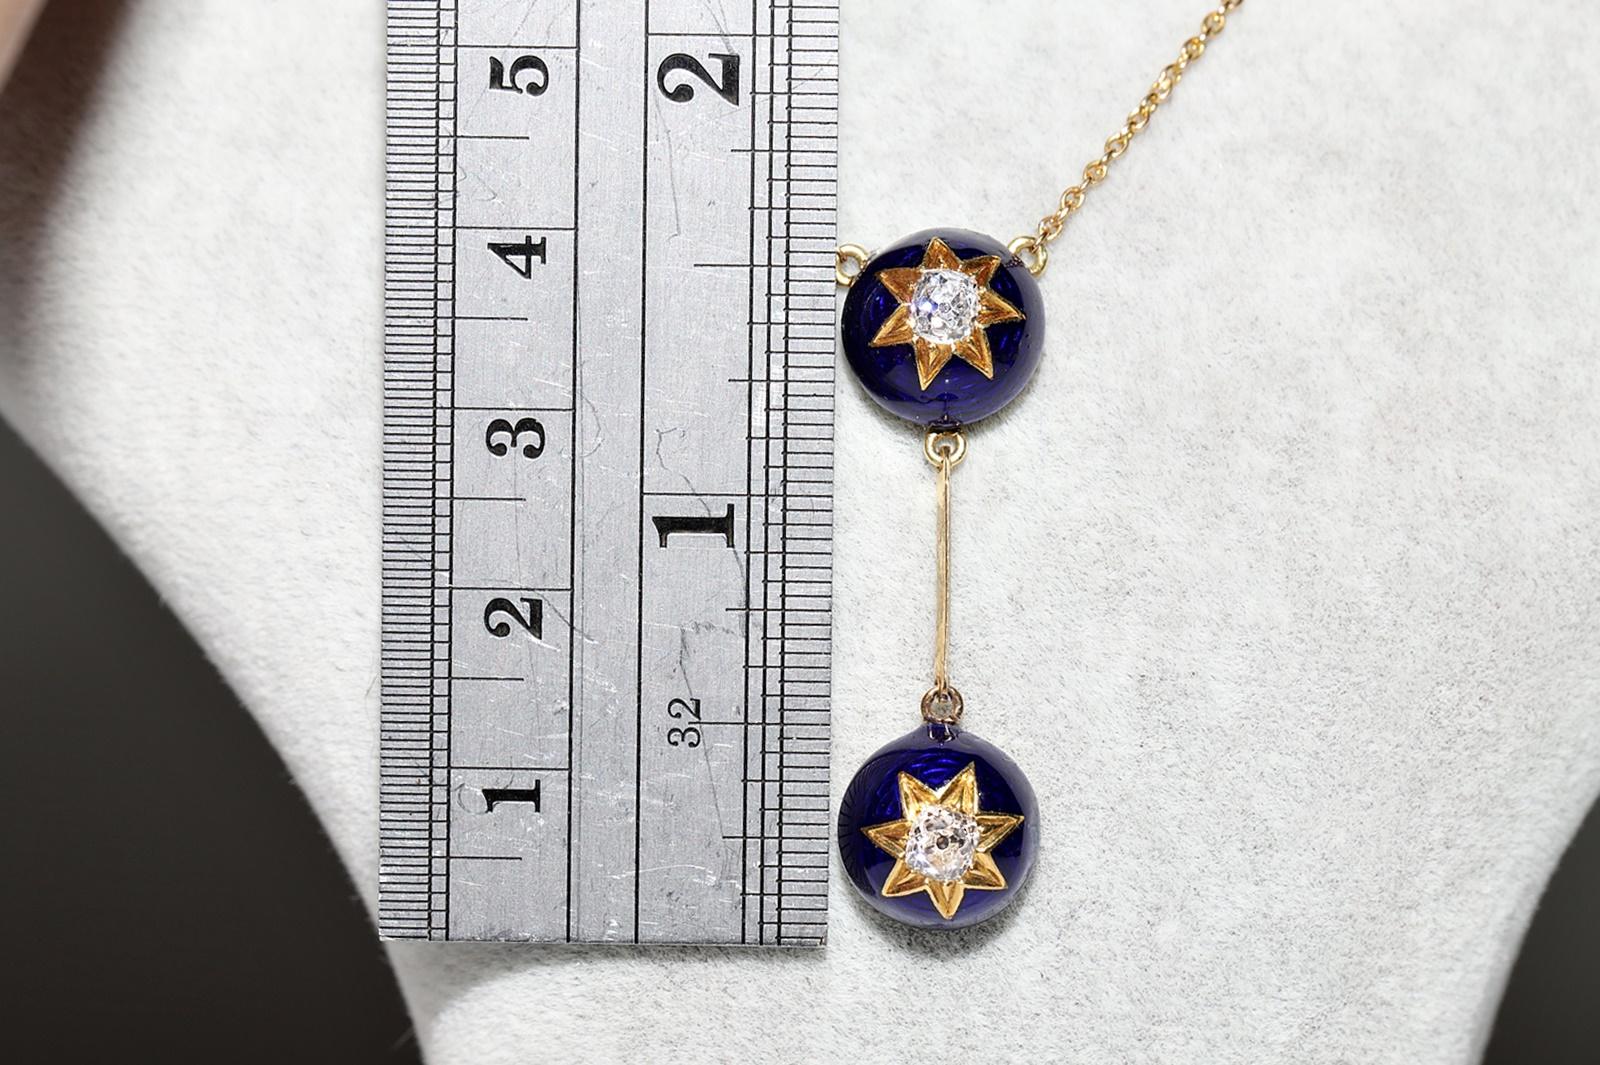 Antique 18K Gold Circa 1900s Natural Old Mine Cut Diamond And Enamel Necklace In Good Condition For Sale In Fatih/İstanbul, 34